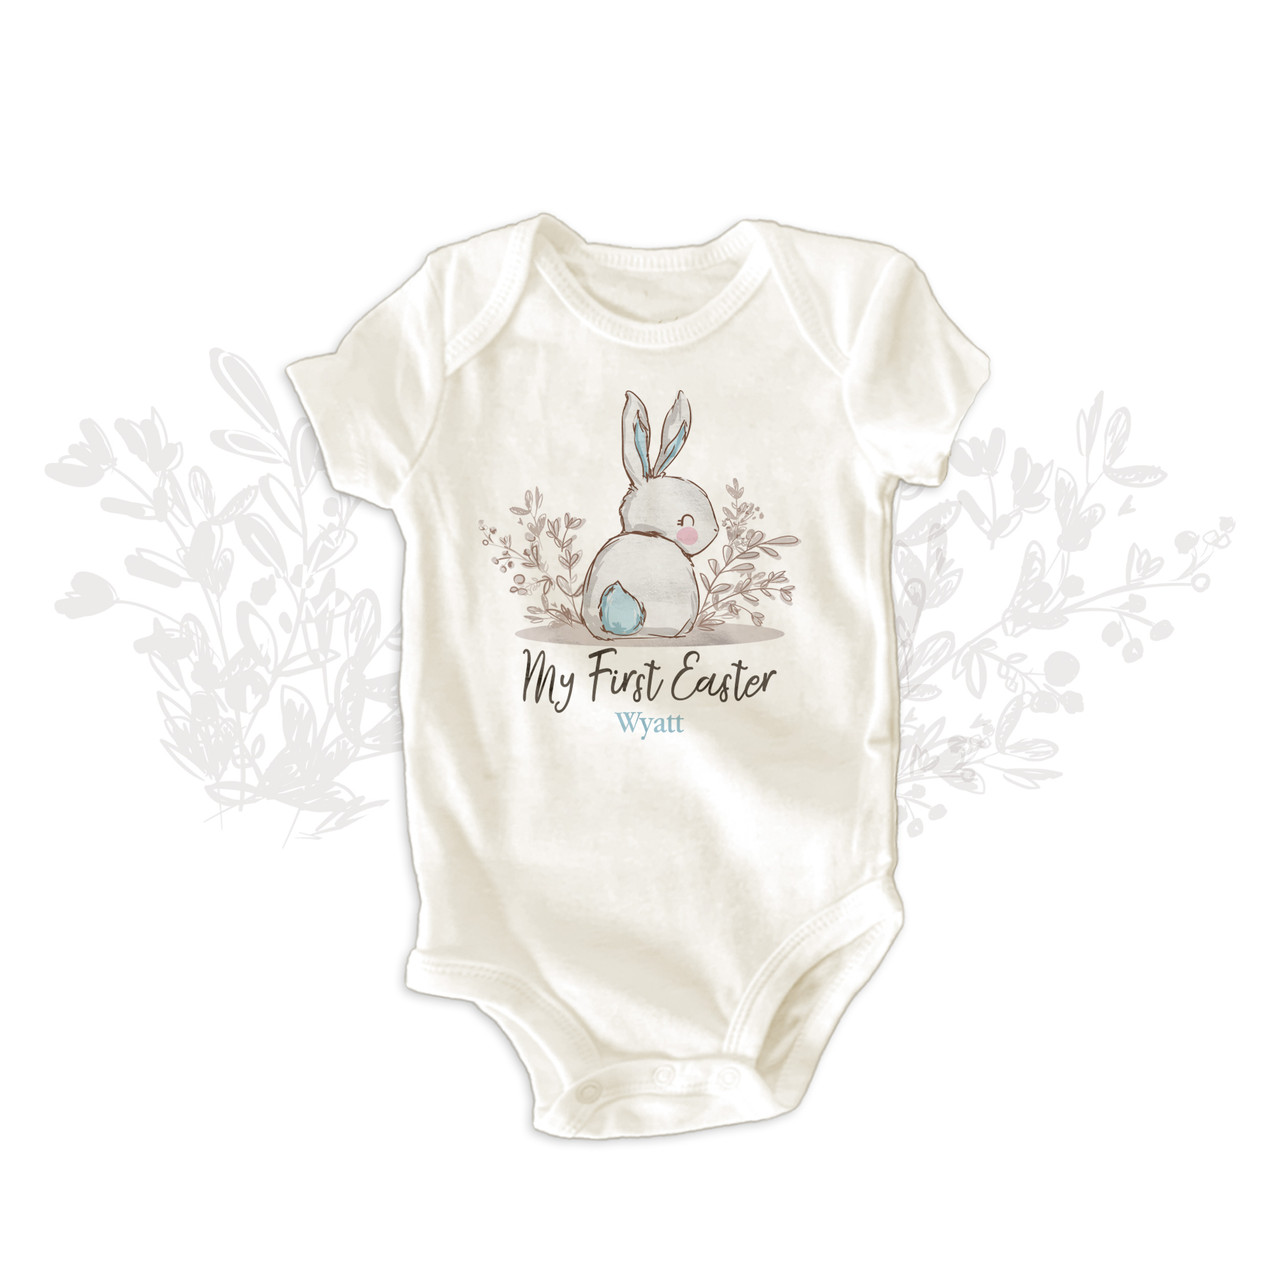 1st Easter bodysuit, blue cottontail bunny boy personalized shirt